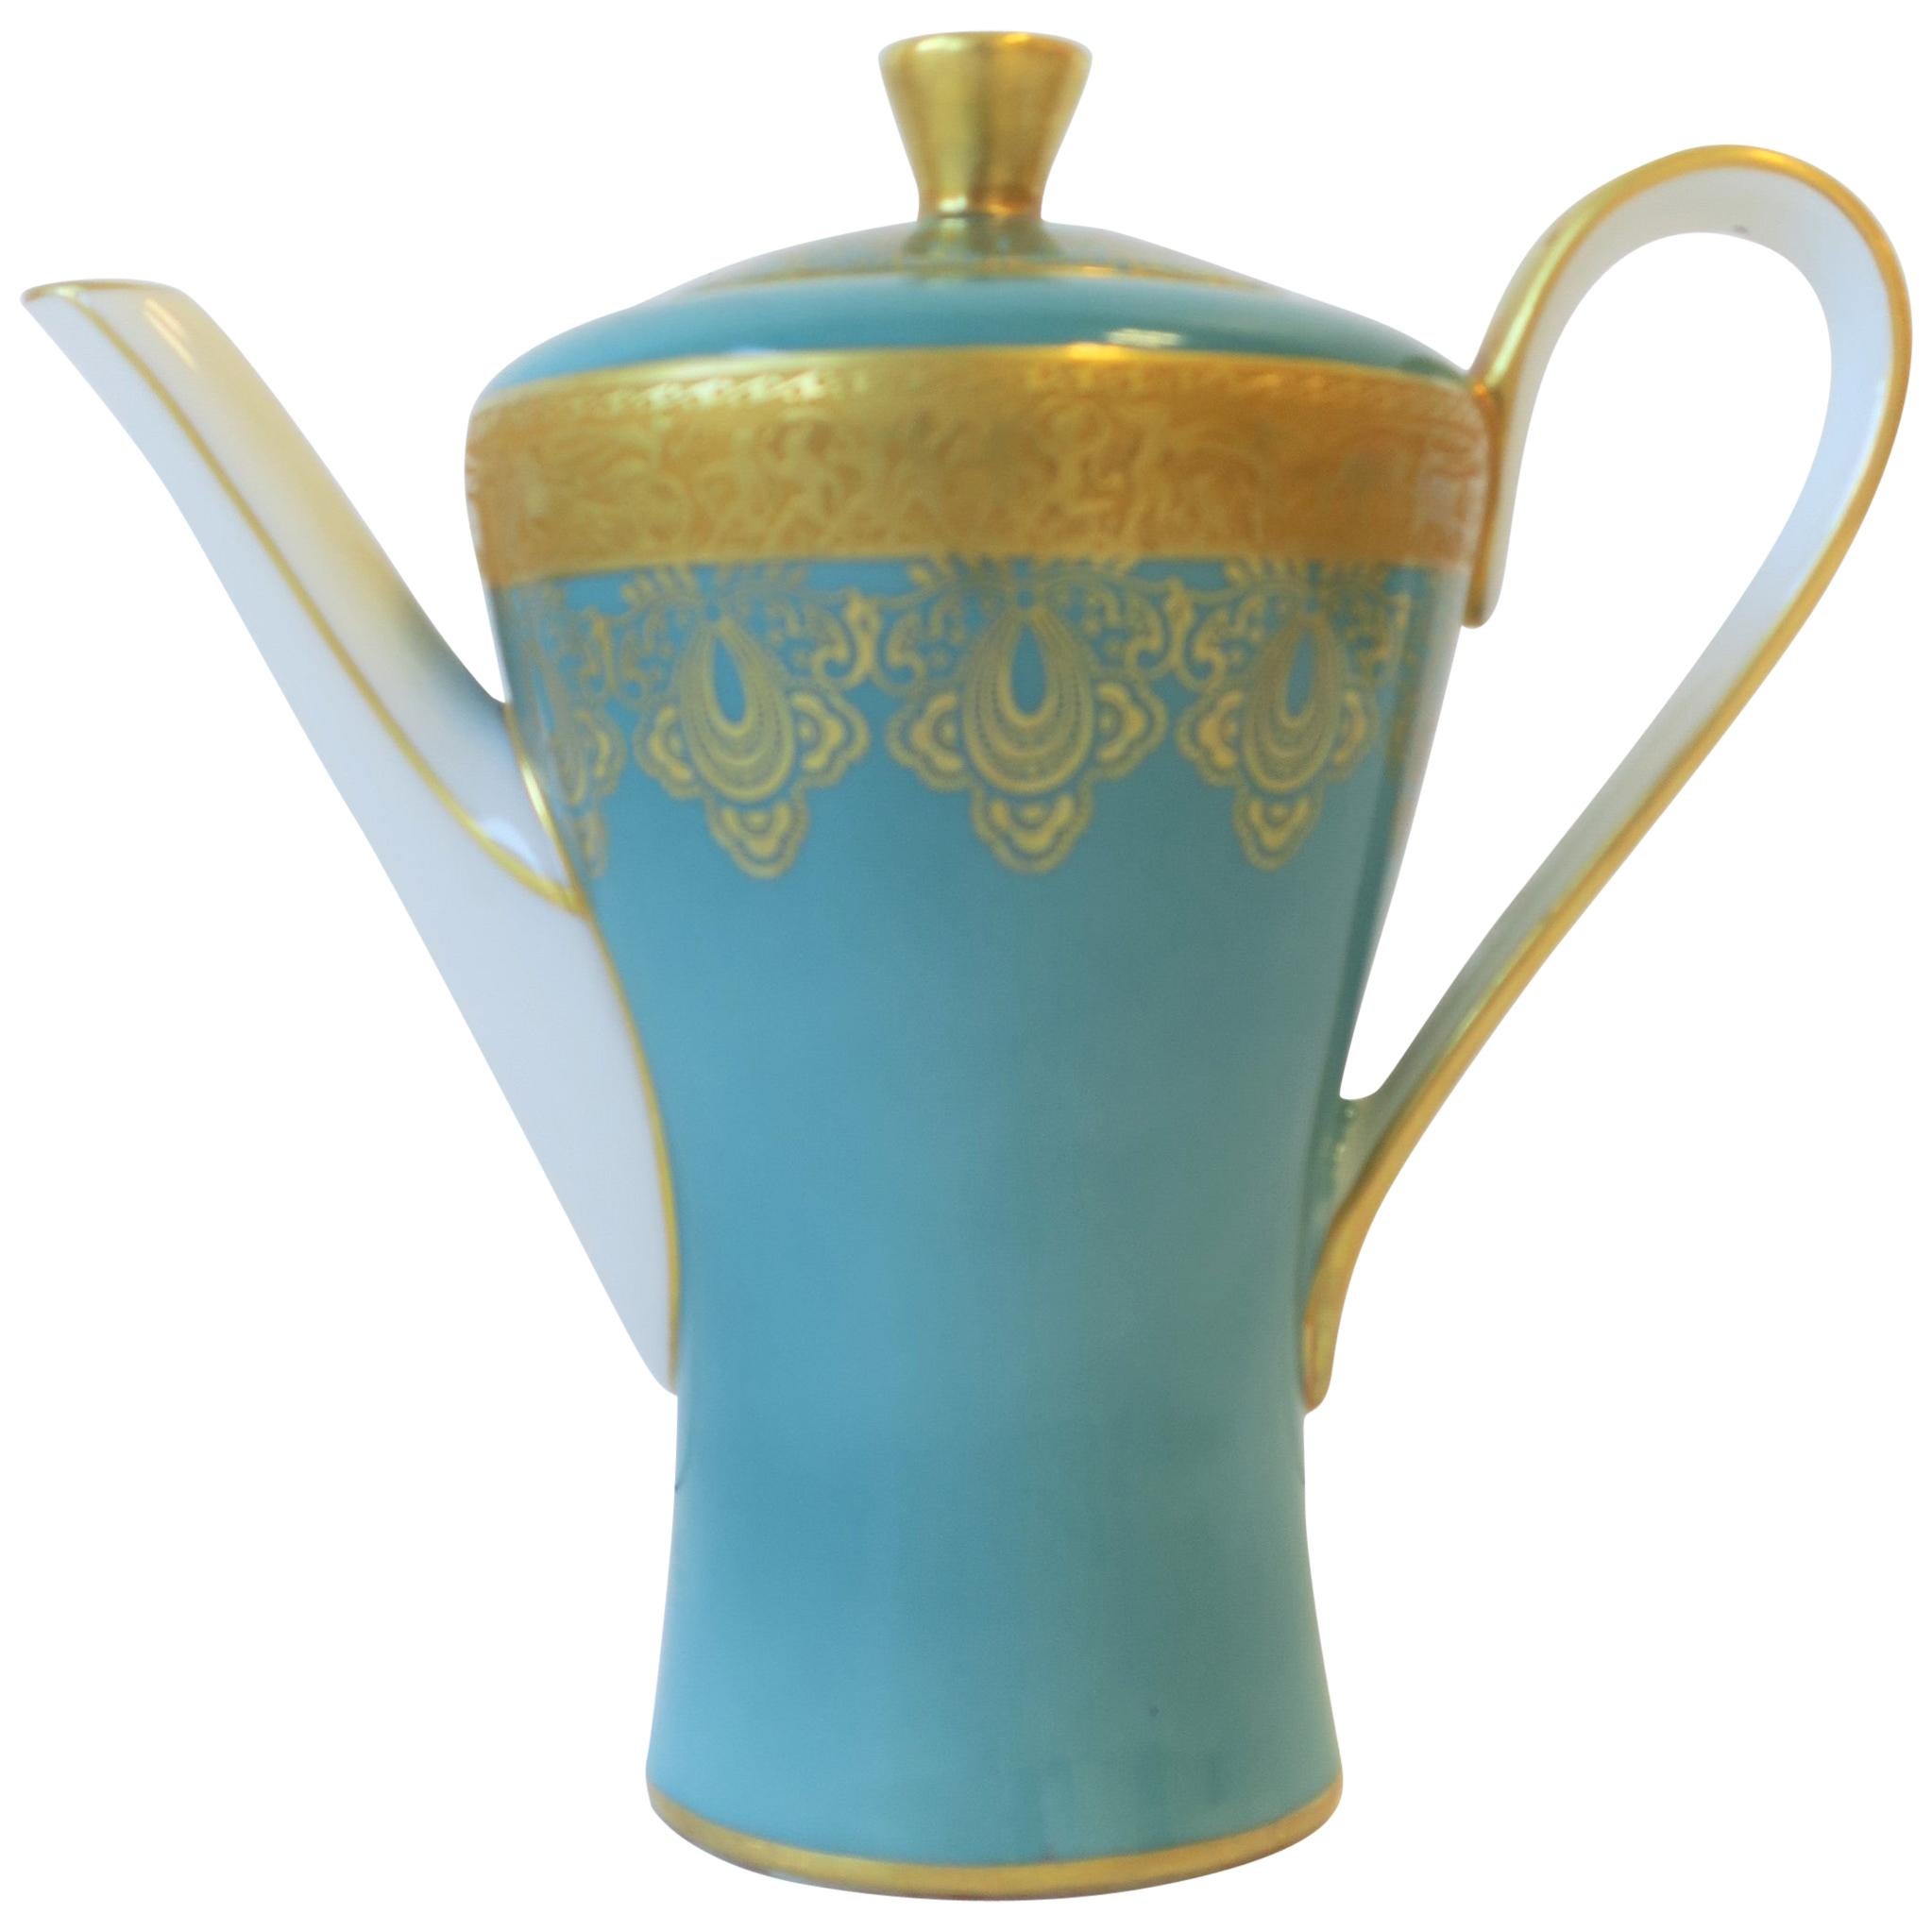 German Blue White and Gold Porcelain Tea or Coffee Pot